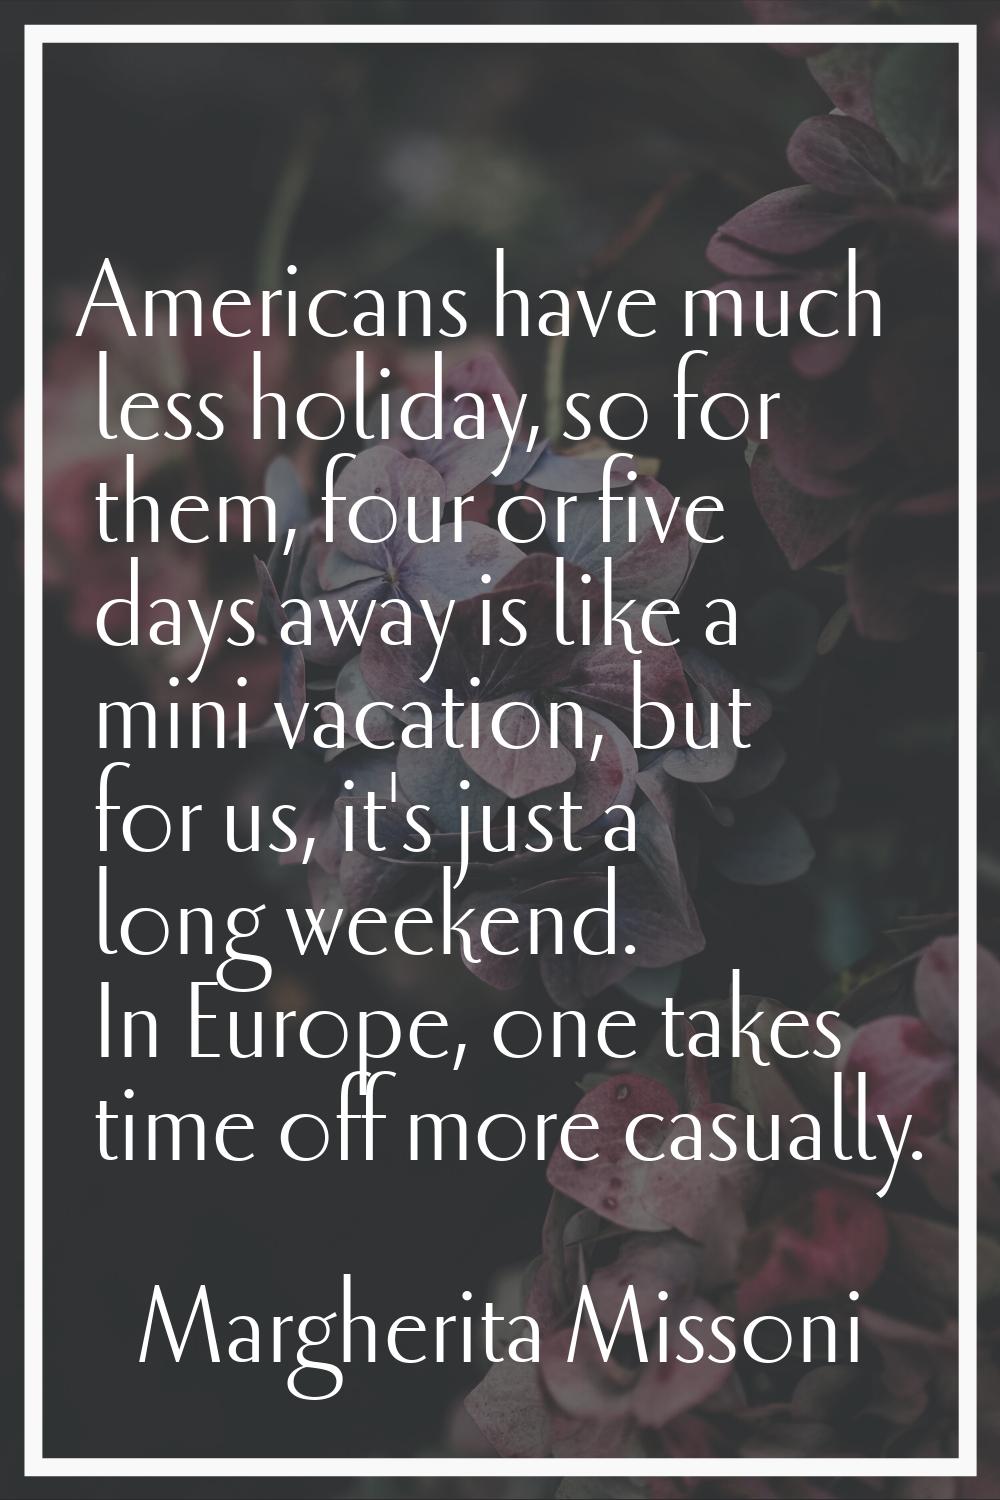 Americans have much less holiday, so for them, four or five days away is like a mini vacation, but 